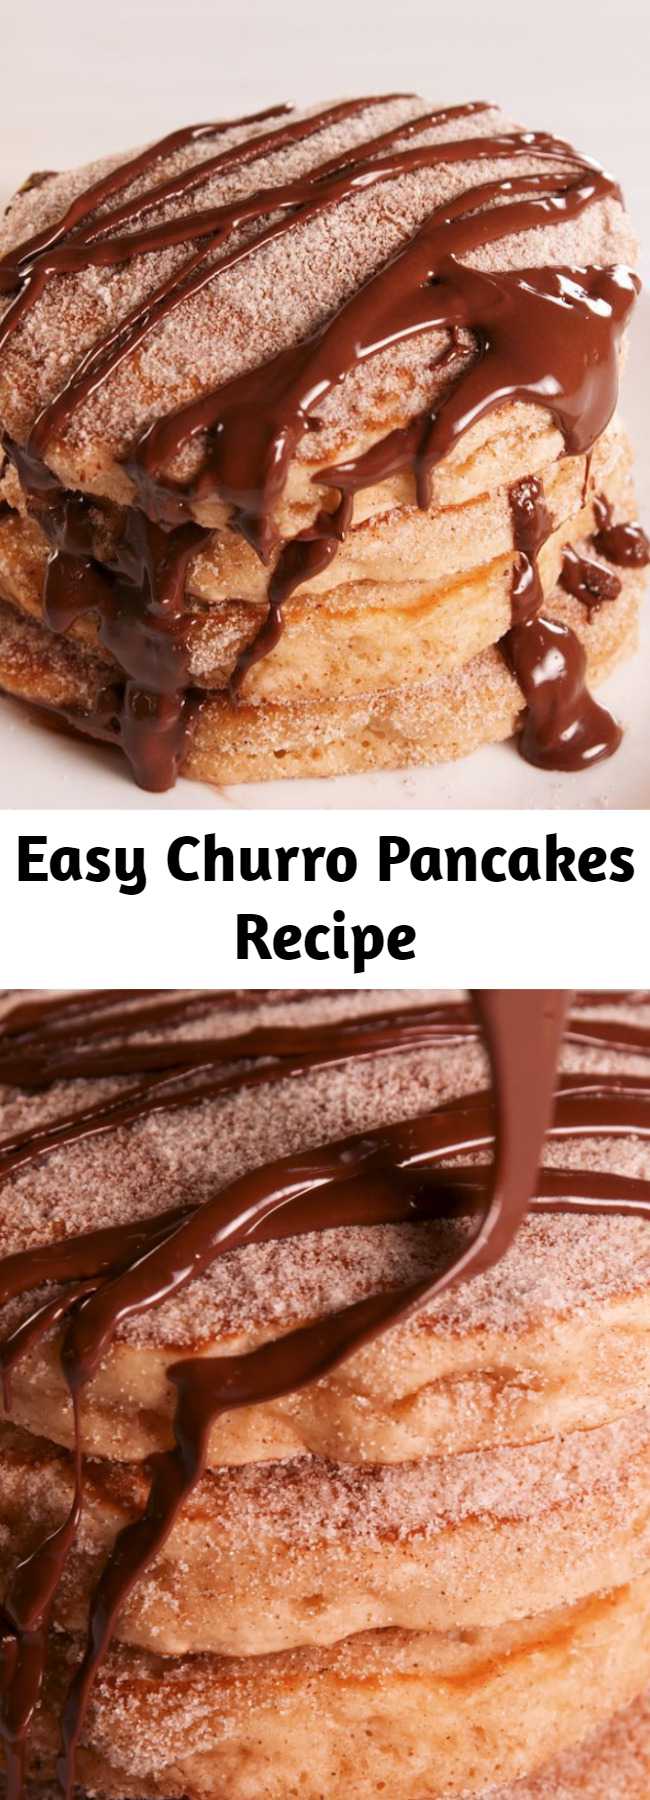 Easy Churro Pancakes Recipe - Churro pancakes are BEYOND fluffy. Cinnamon, brown sugar, and melted chocolate make these a brunch staple. #easy #recipe #churro #Pancakes #churropancakes #brownsugar #breakfast #brunch #indulgent